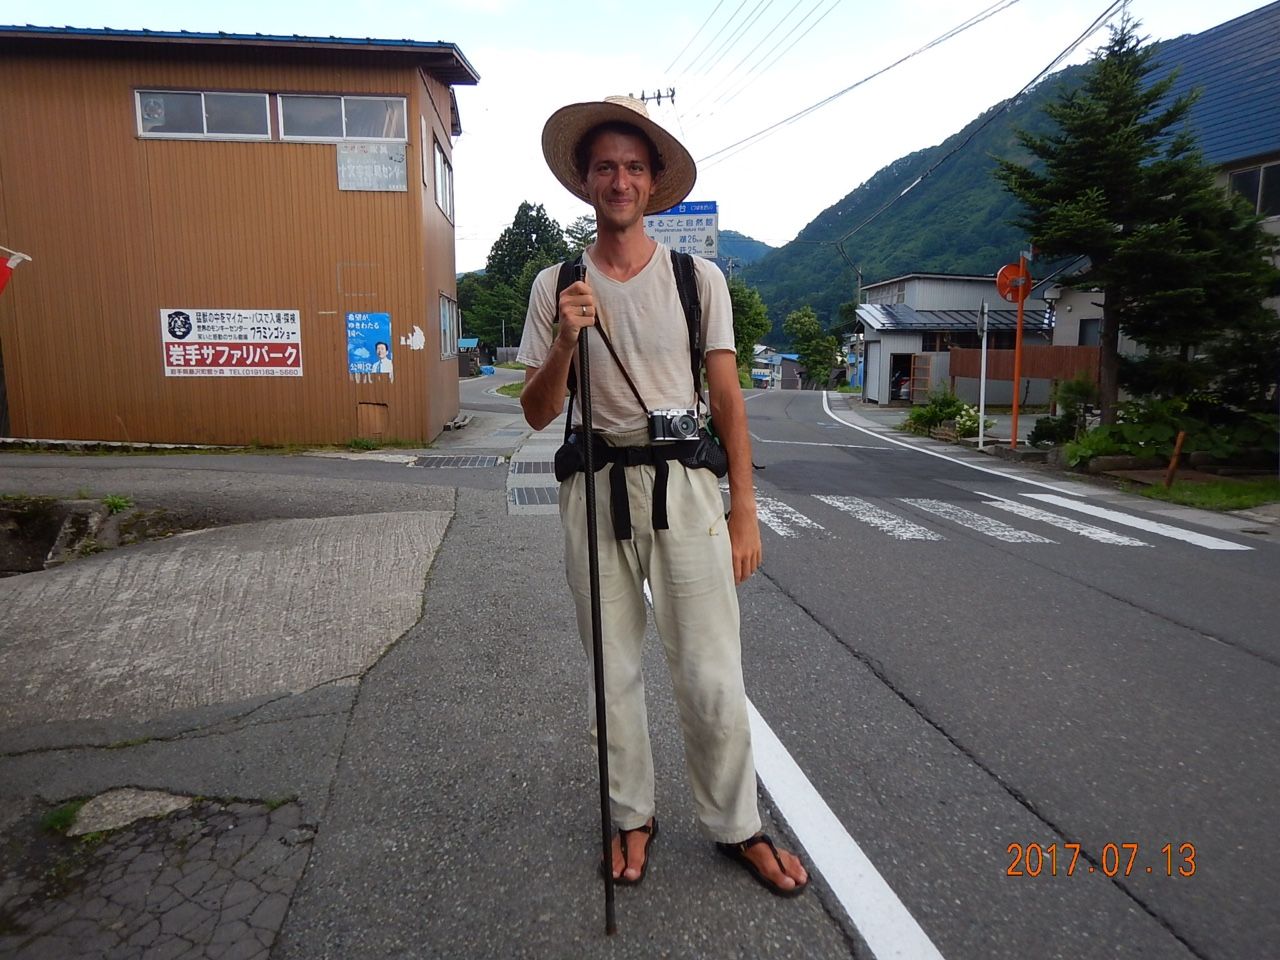 Peter Orosz, in a straw hat and holding his walking stick, stands by the side of the road.